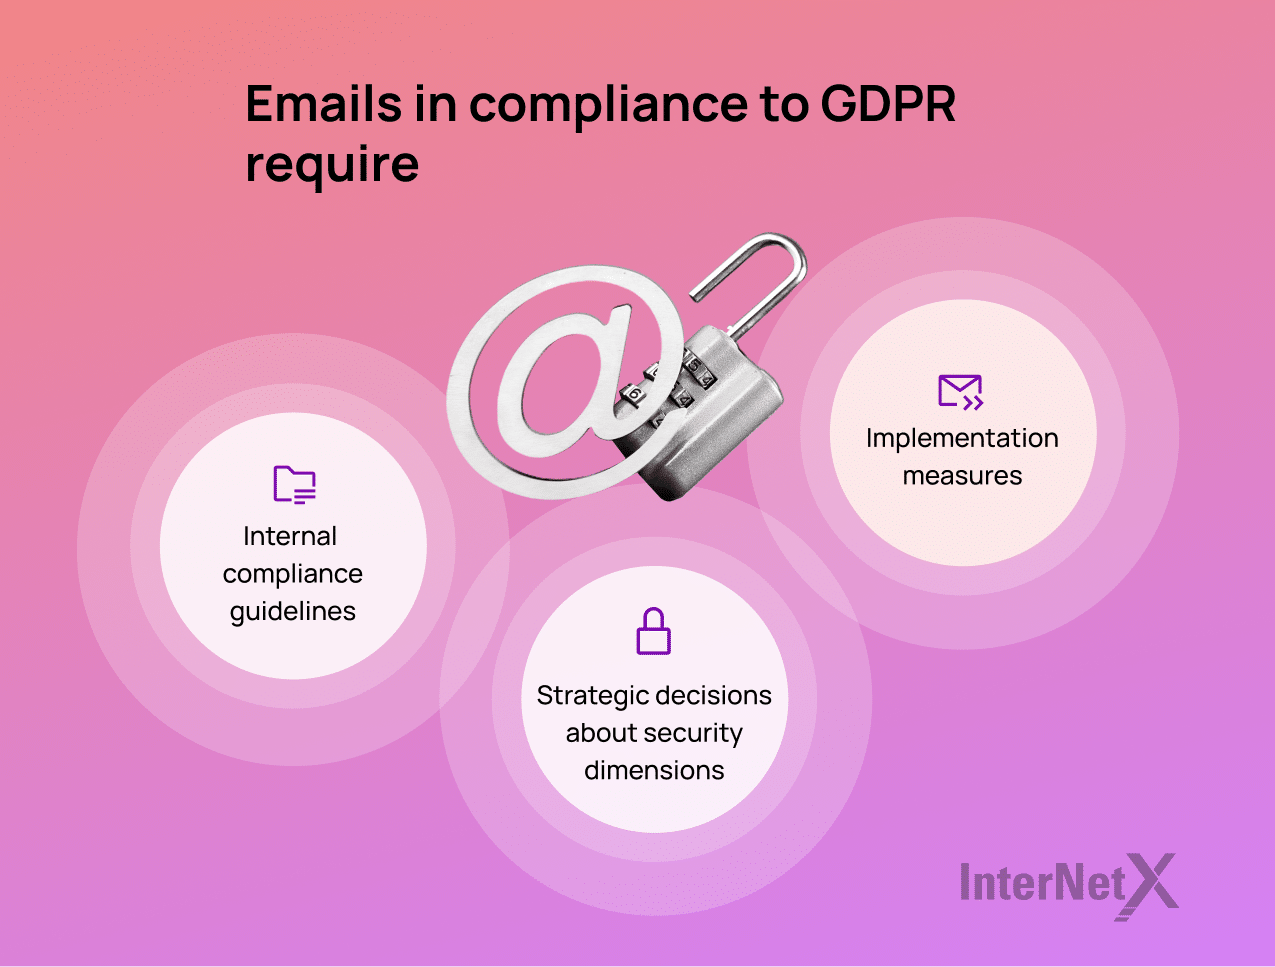 Illustration of GDPR-compliant email requirements: 1) Meeting internal compliance guidelines by obtaining user consent and maintaining data accuracy, 2) Making strategic security decisions like encryption and data minimization, and 3) Implementing measures such as staff training and regular audits.